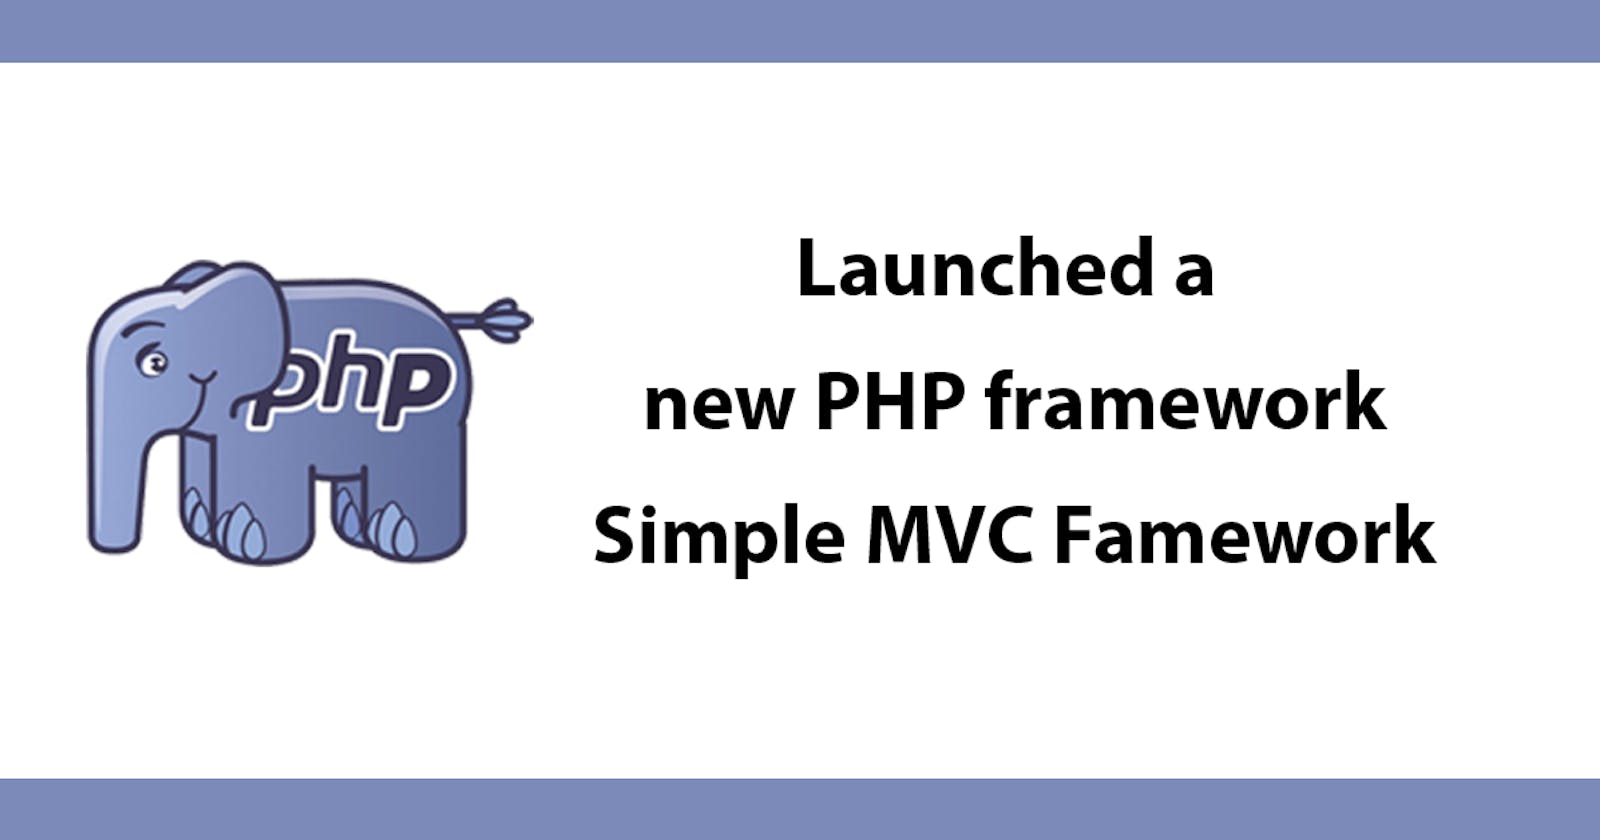 Launched a new PHP framework - Simple MVC Famework